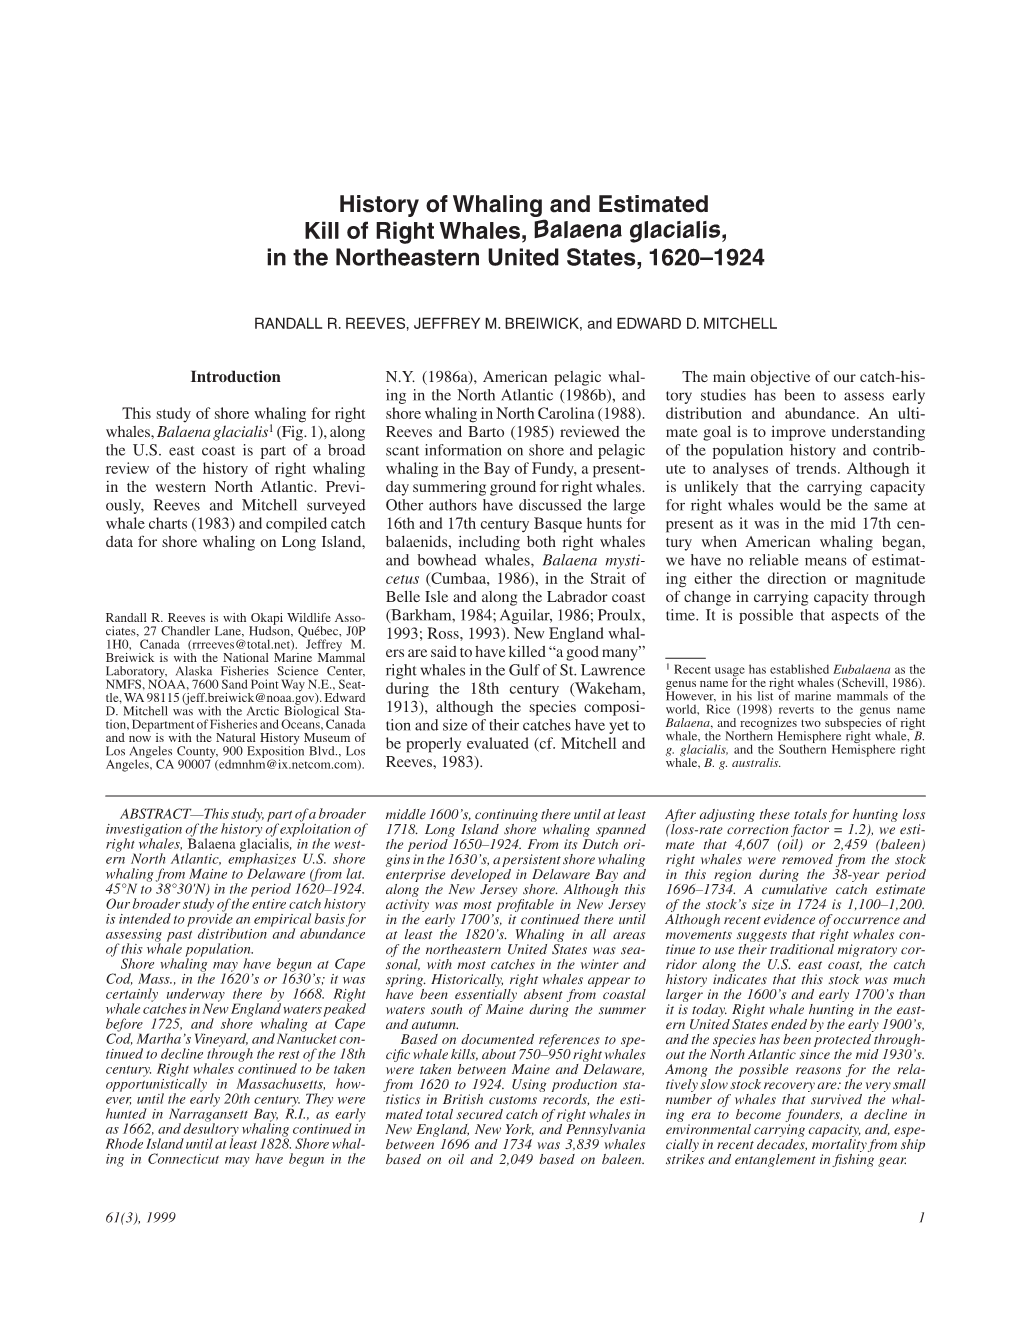 History of Whaling and Estimated Kill of Right Whales, Balaena Glacialis, in the Northeastern United States, 1620–1924